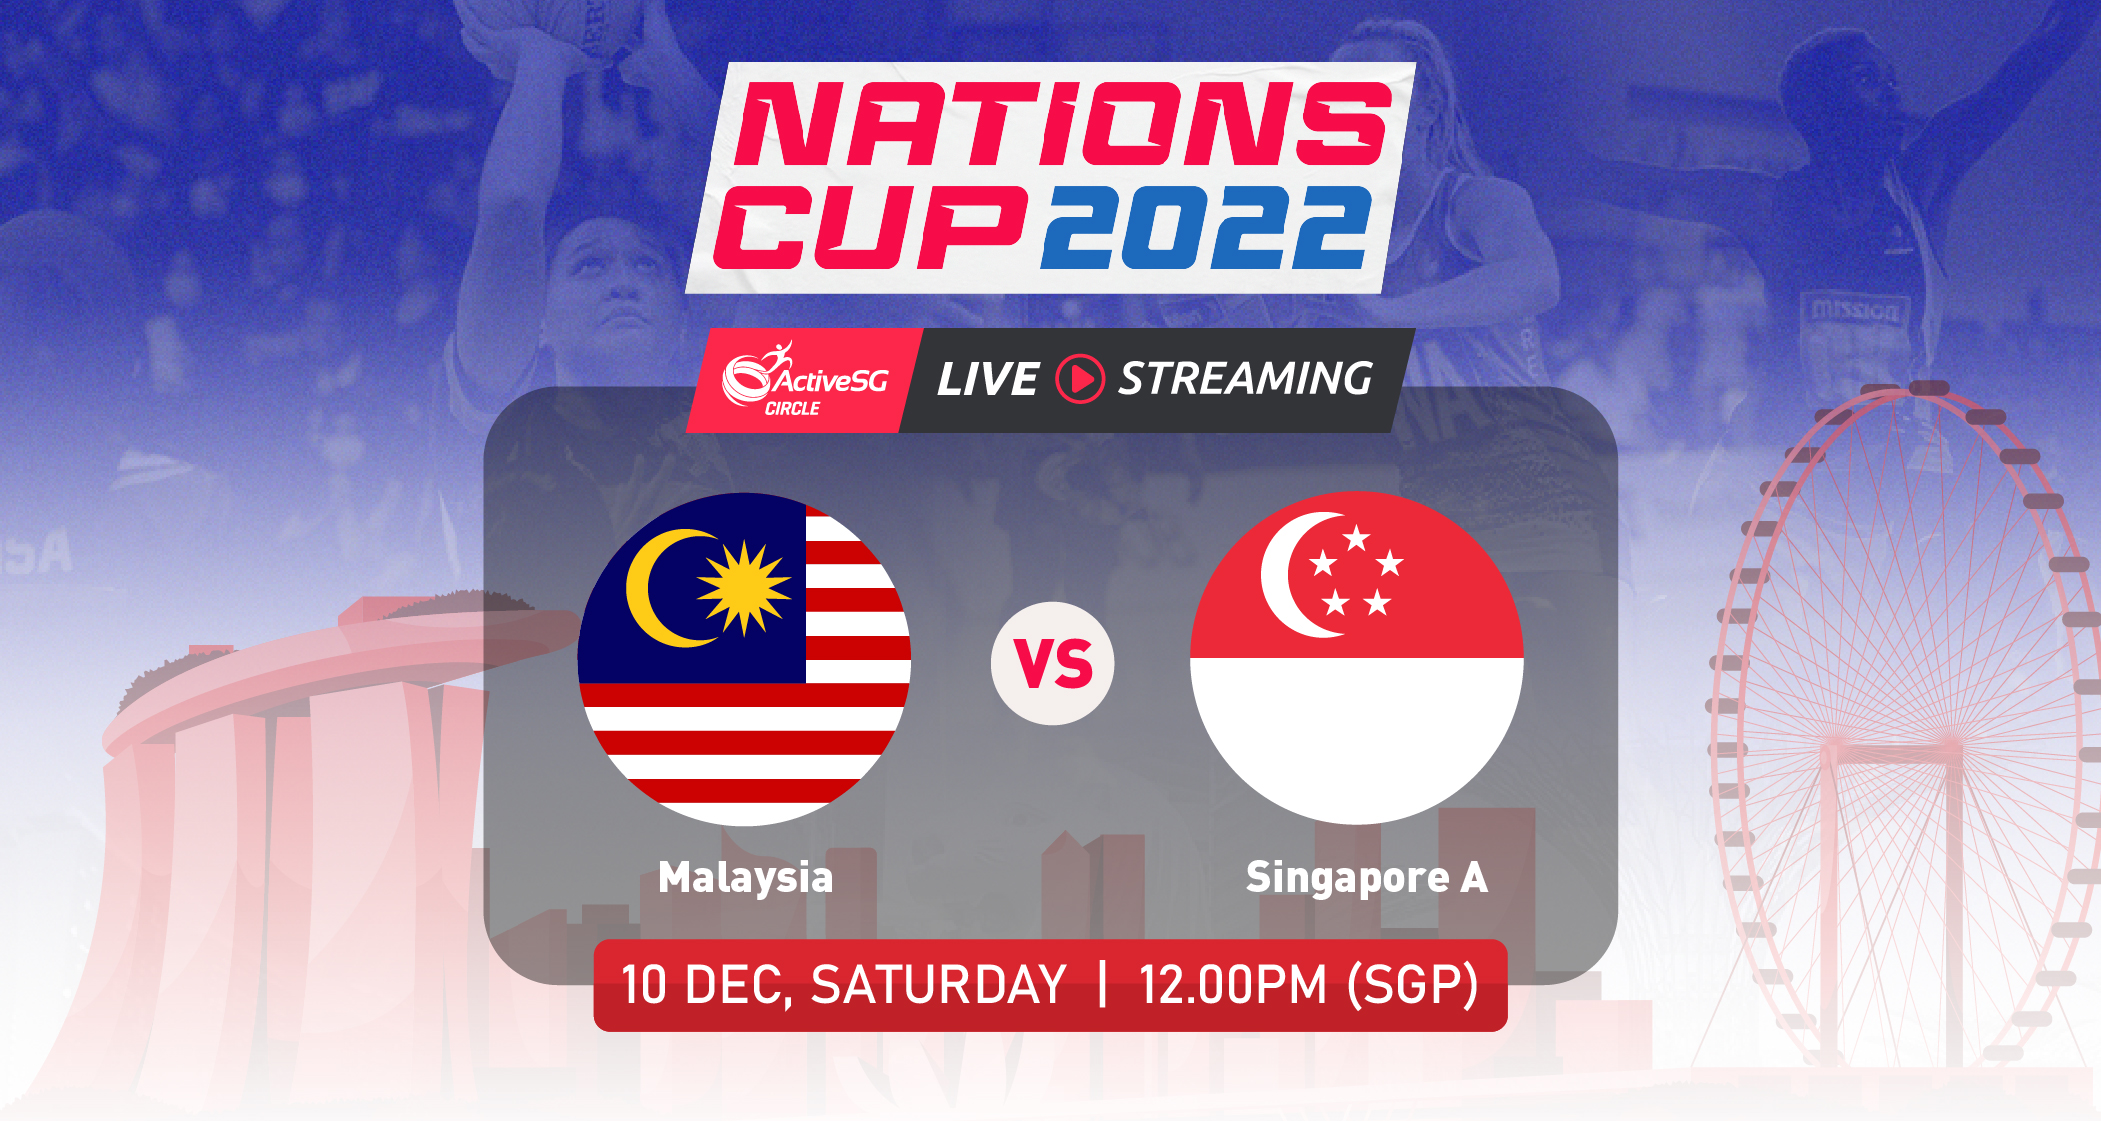 Malaysia 🇲🇾 vs 🇸🇬 Singapore A | Nations Cup 2022